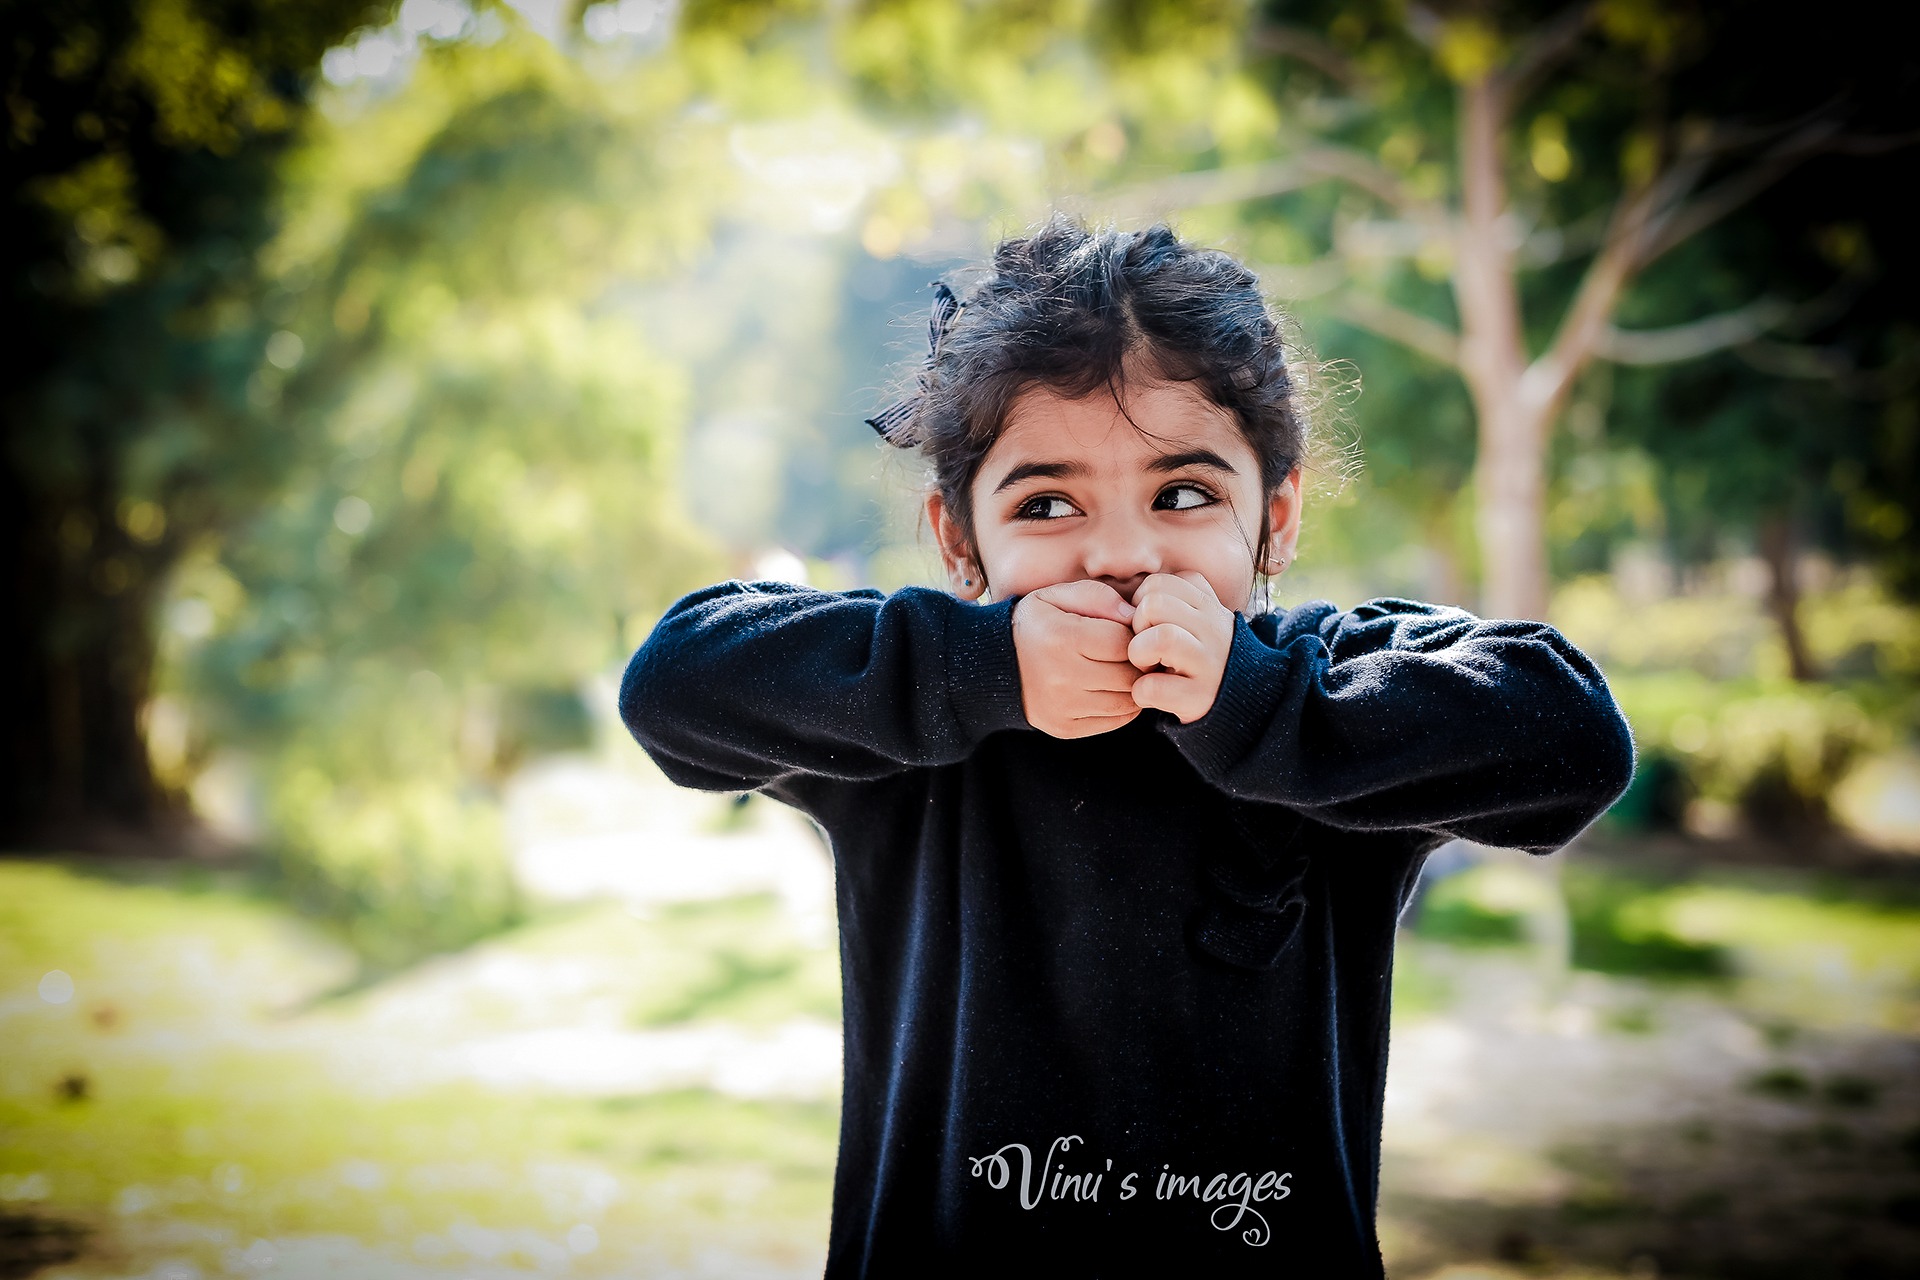 Child Photography Ideas for Better Pictures